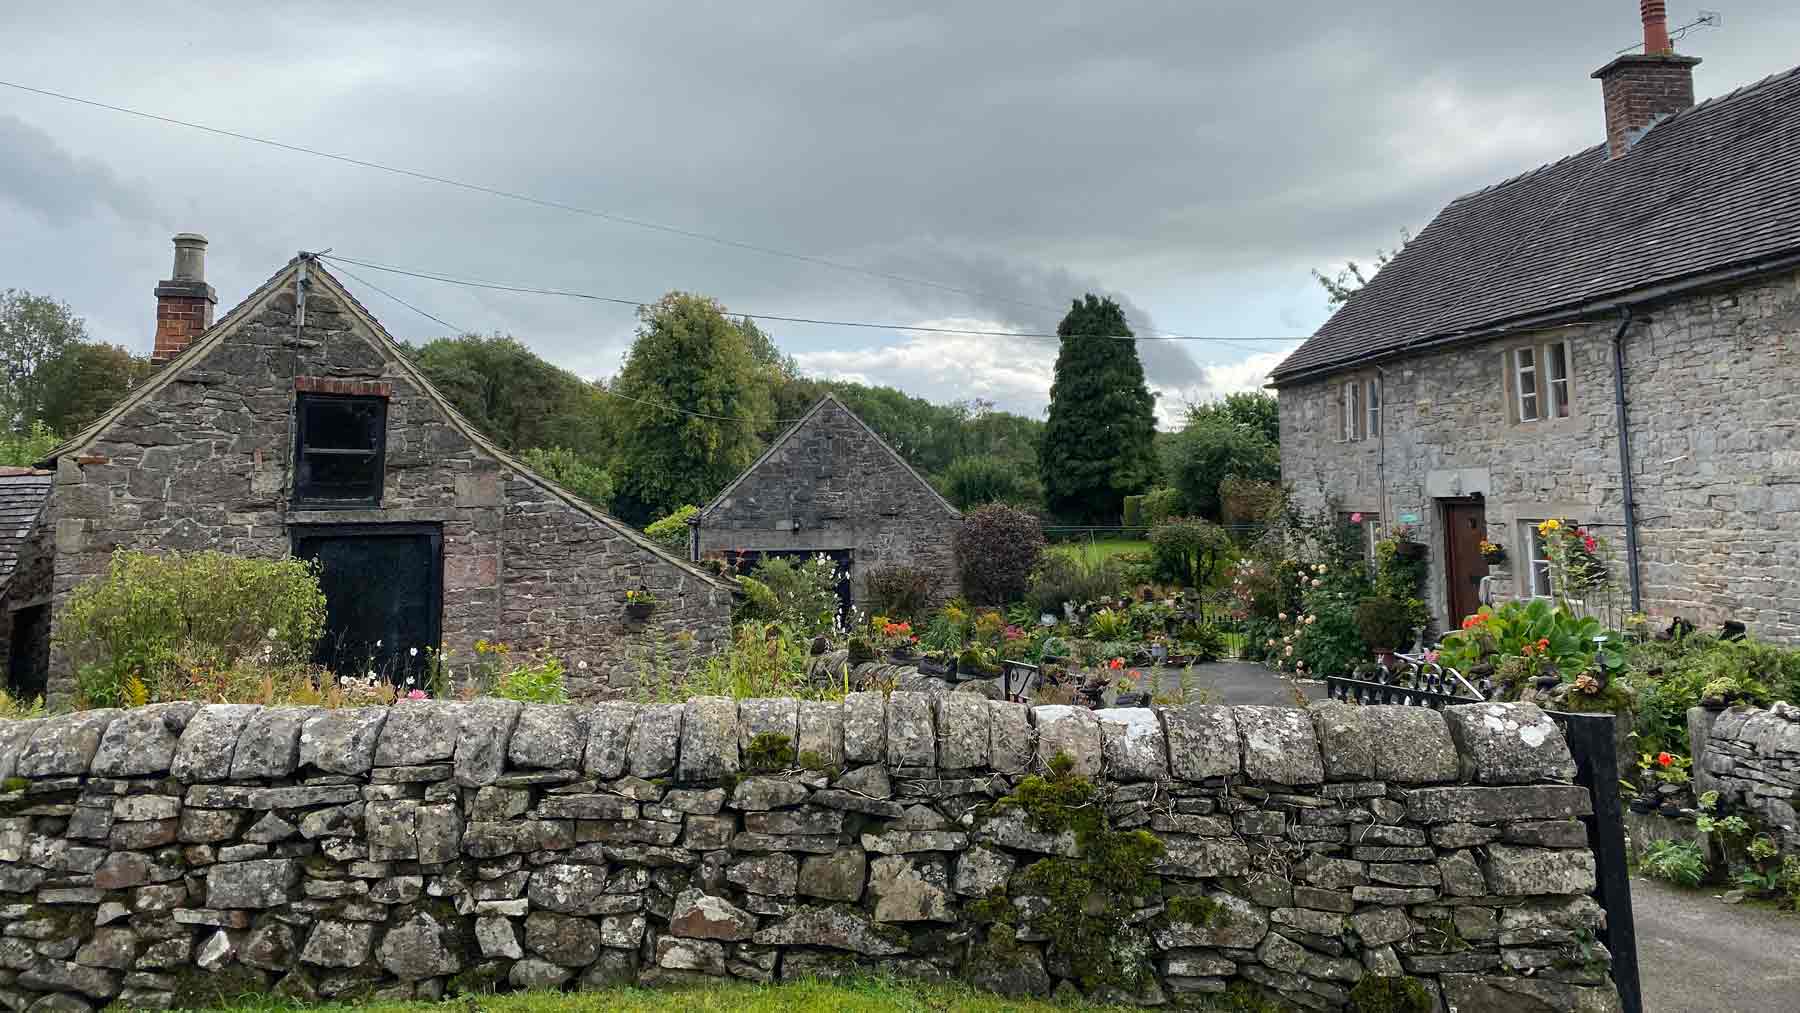 Stone cottages in the beautiful village of Tissington, Peak District